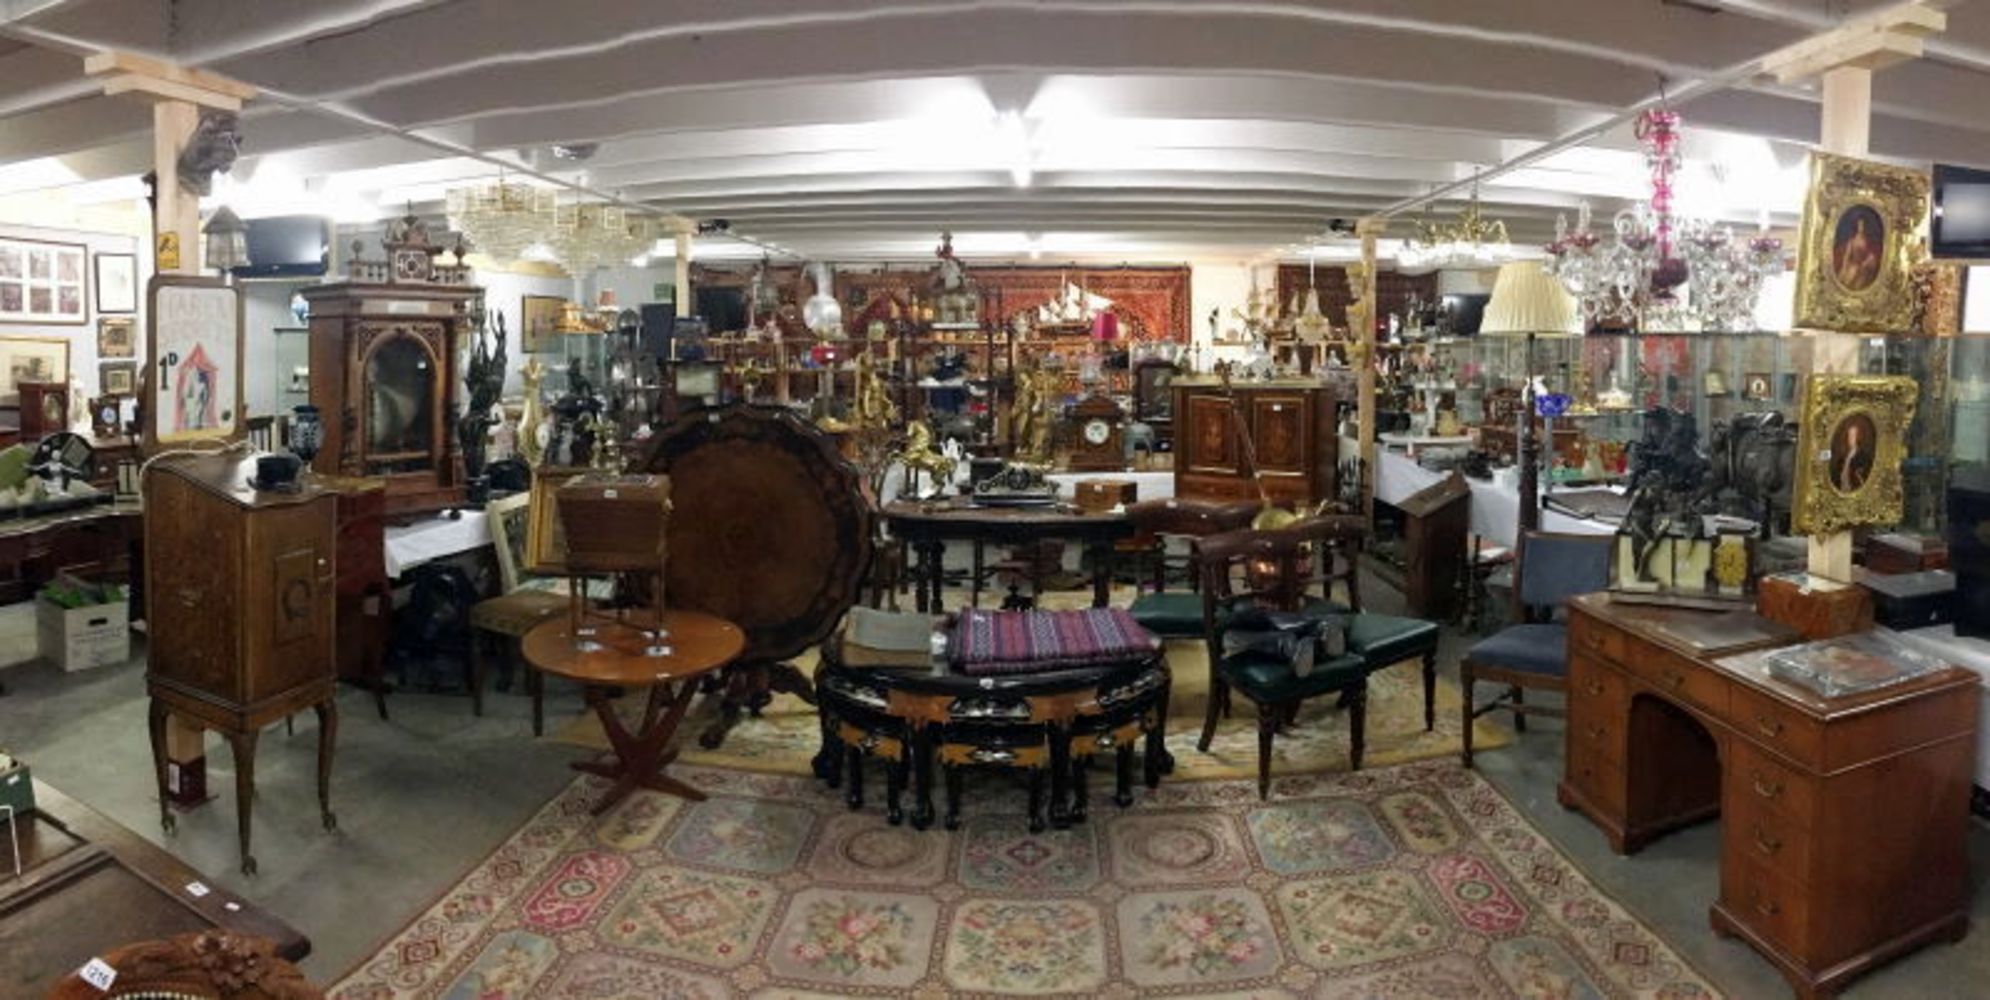 A 3 day Antiques & Collectors including Gold, Jewellery, Silver, Furniture, etc.